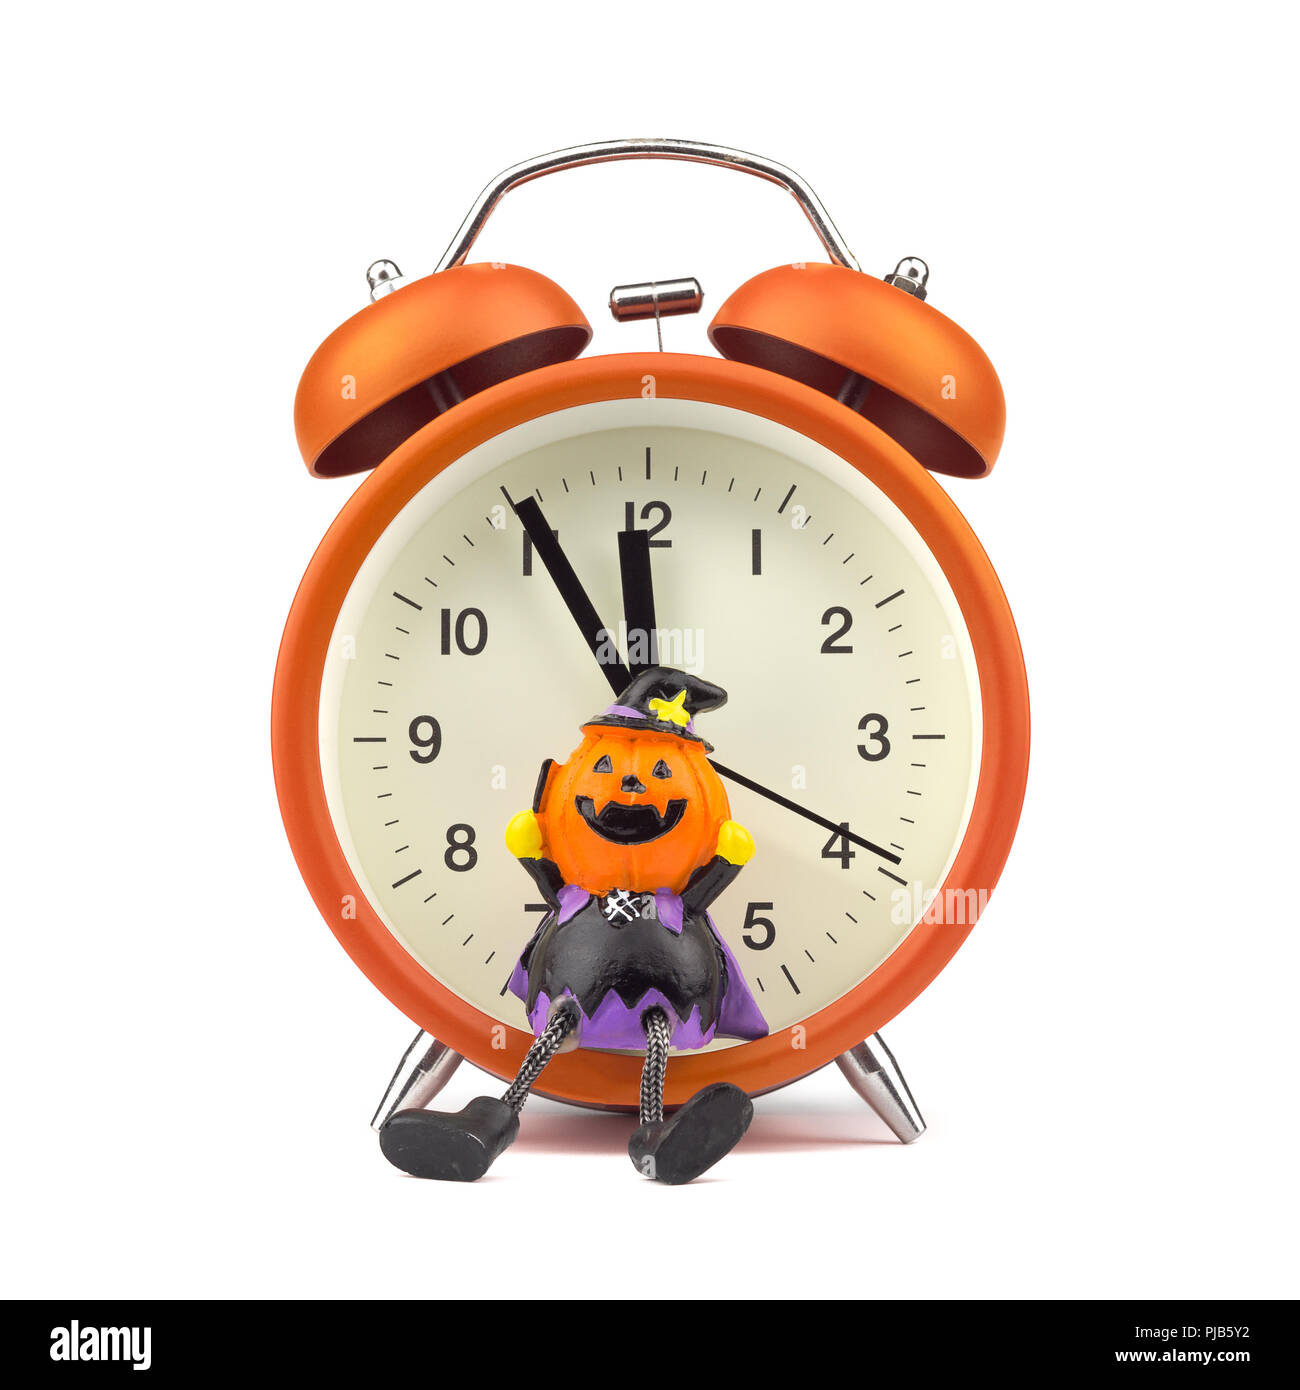 Count down to holloween festival concept. Orange alarm clock with pumpkins ghost toy isolated on white Stock Photo